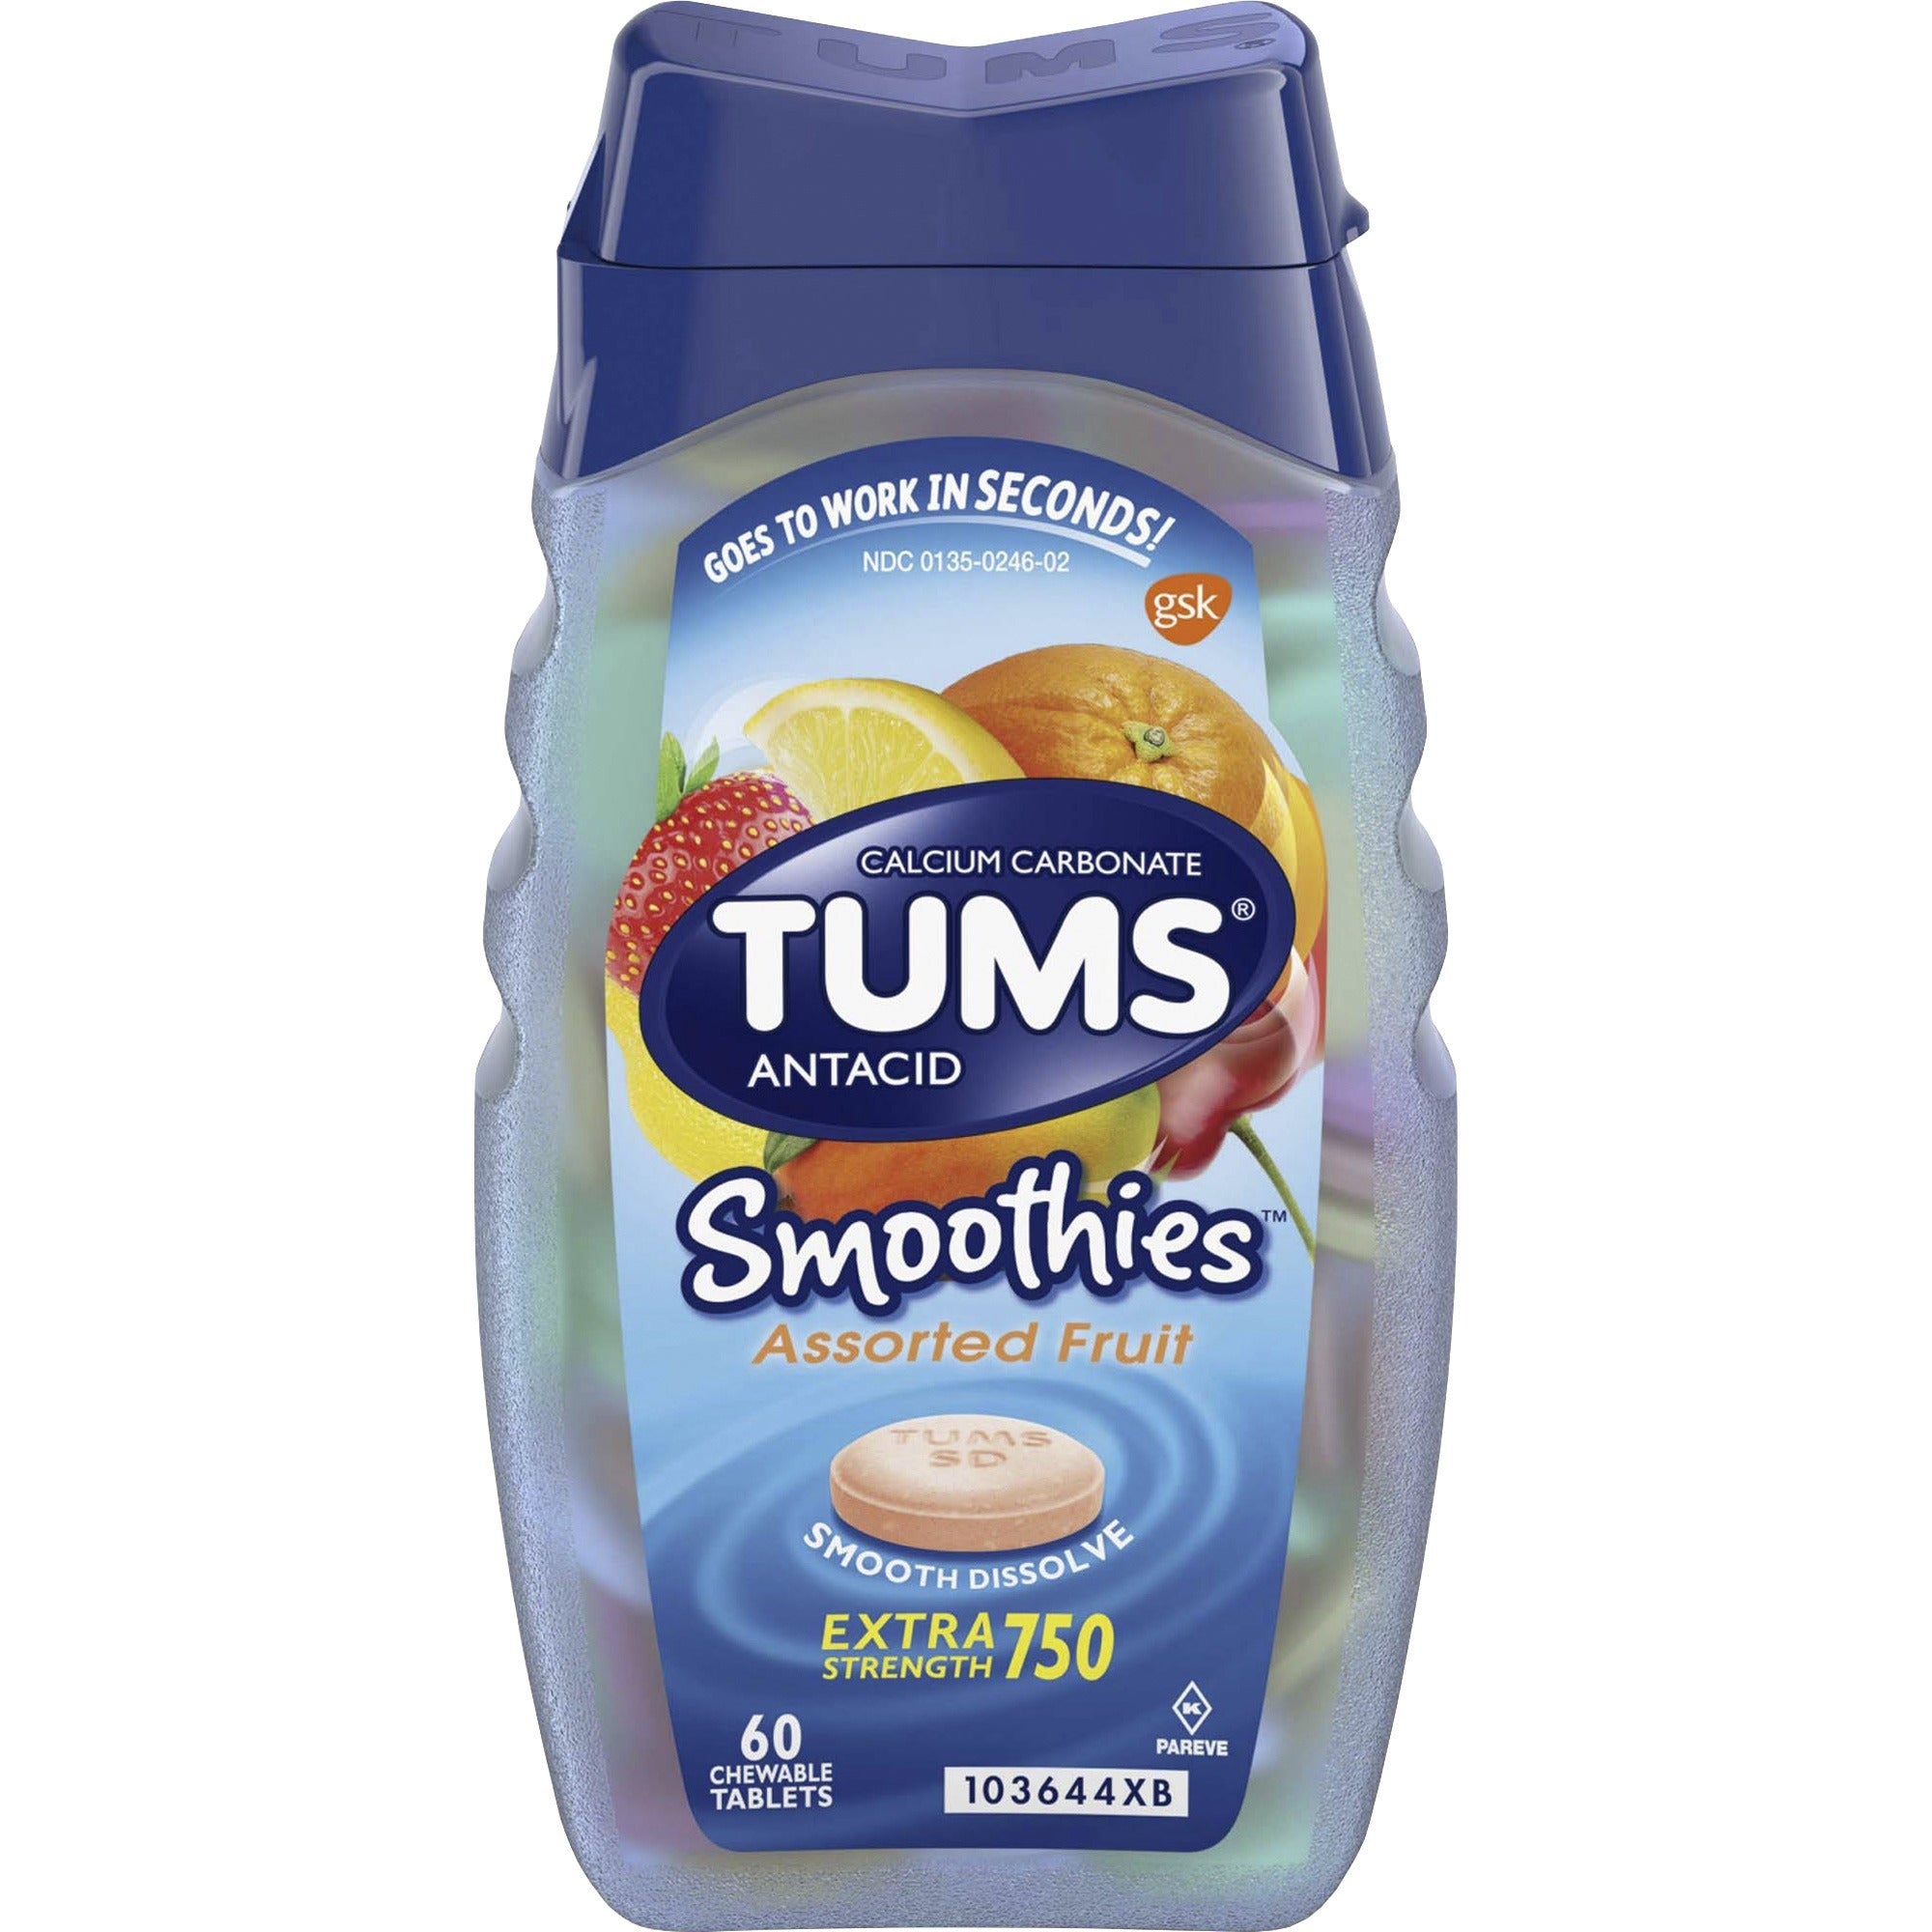 TUMS Smoothies Extra Strength Antacid Chewable Tablet - For Acid Indigestion, Heartburn, Sour Stomach, Upset Stomach - Assorted Fruit - 1 EachBottle - 2